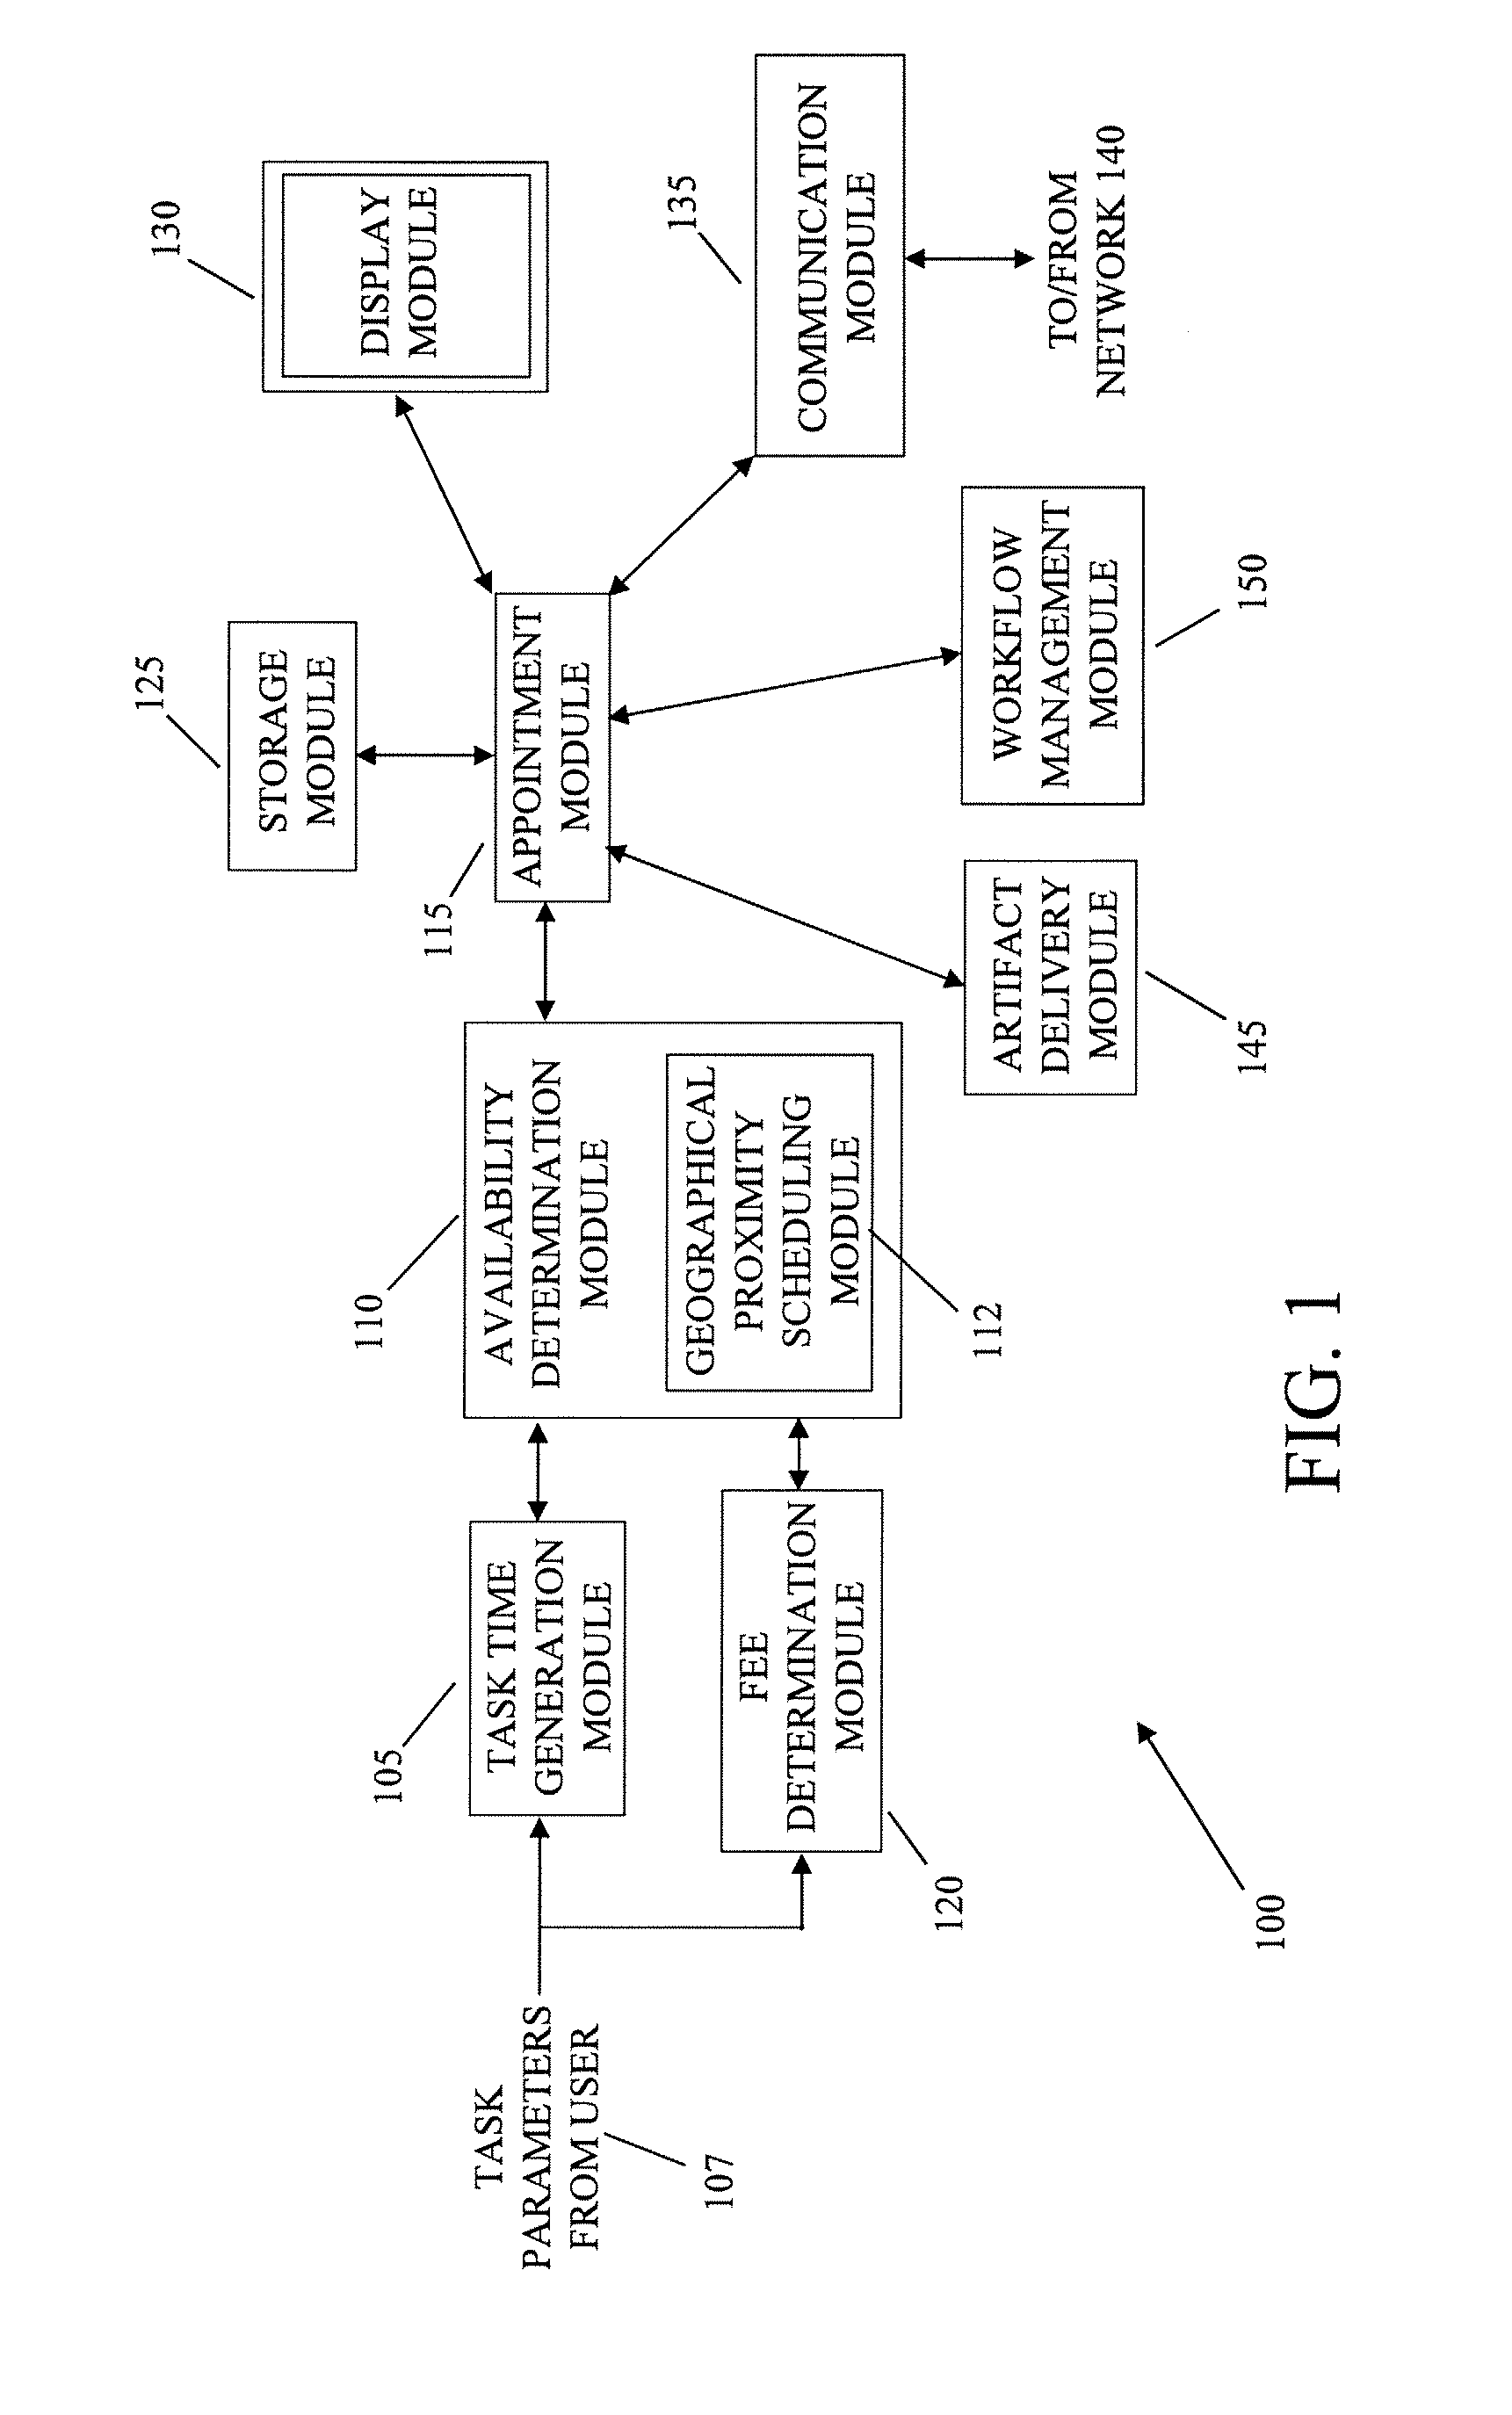 Parameter-based appointment scheduling system and method